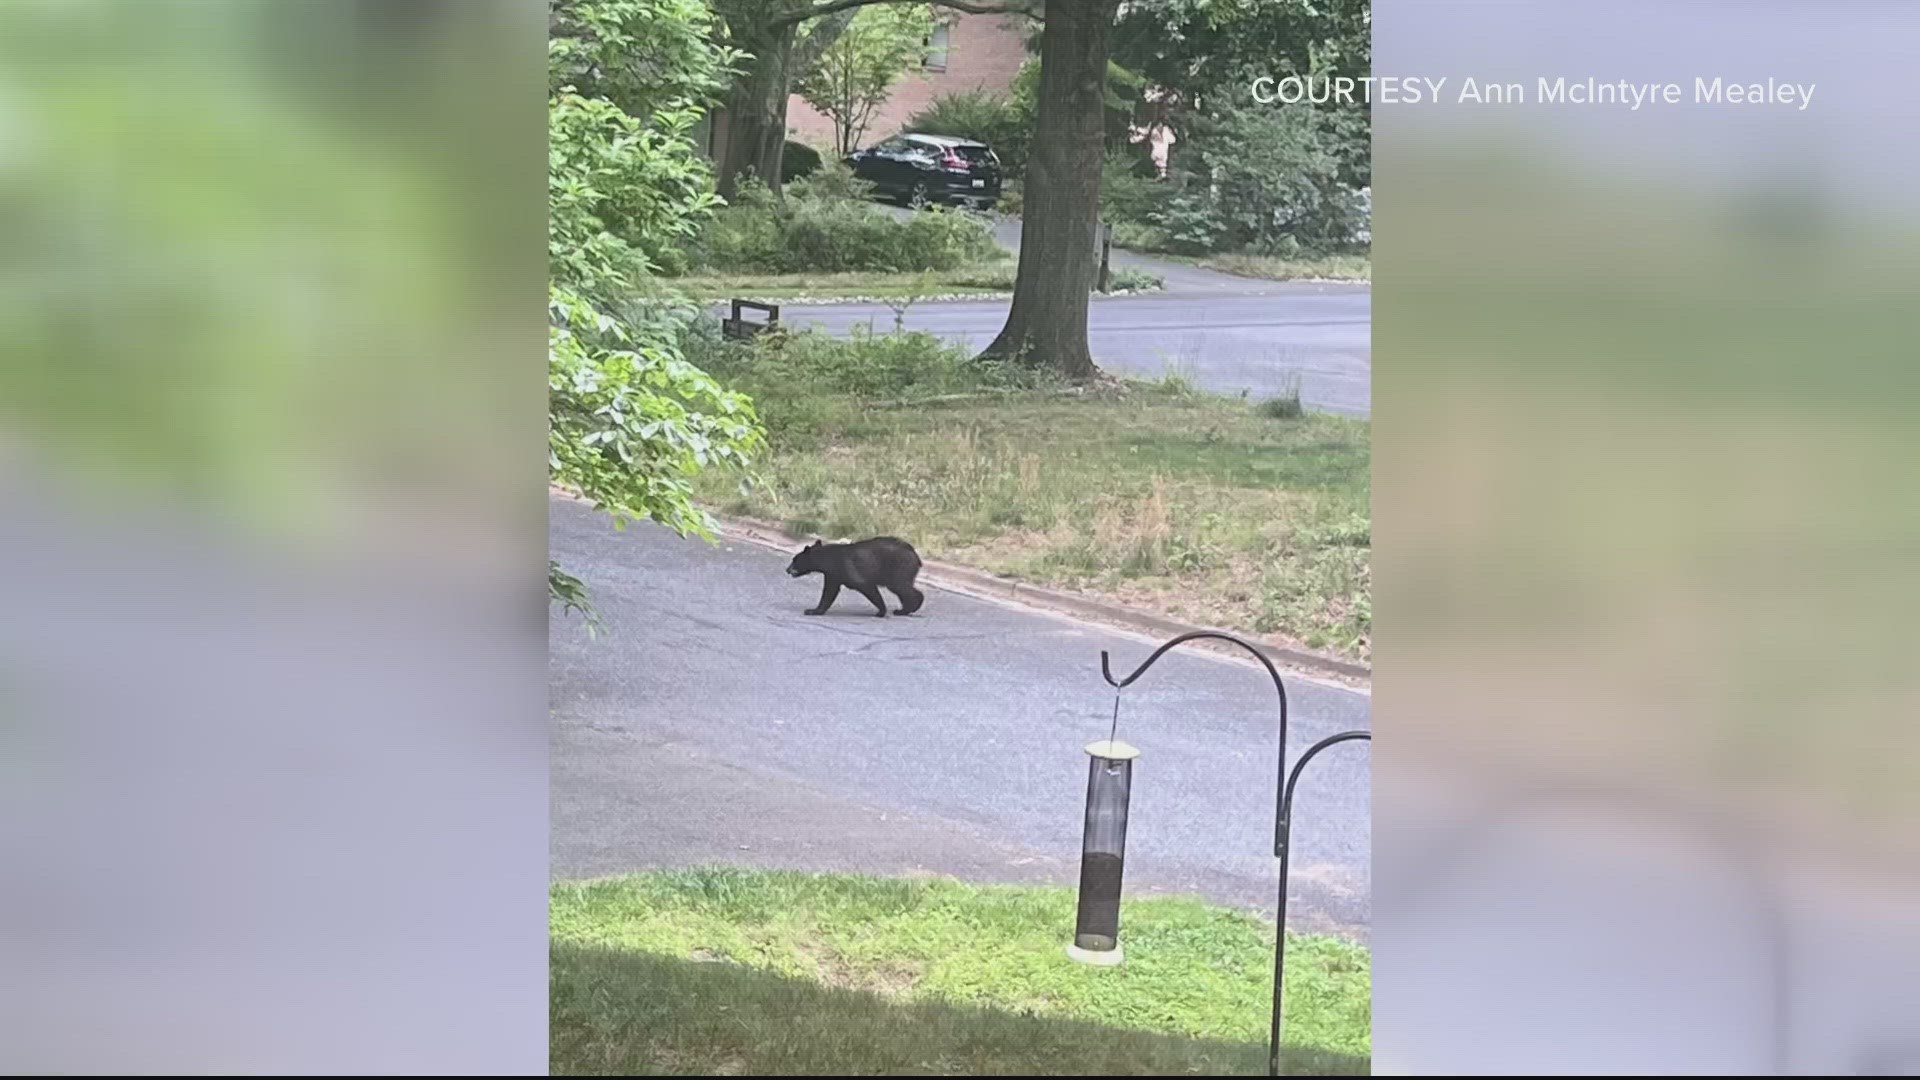 This is the latest instance in a string of bear sightings across the DMV in less than a week.